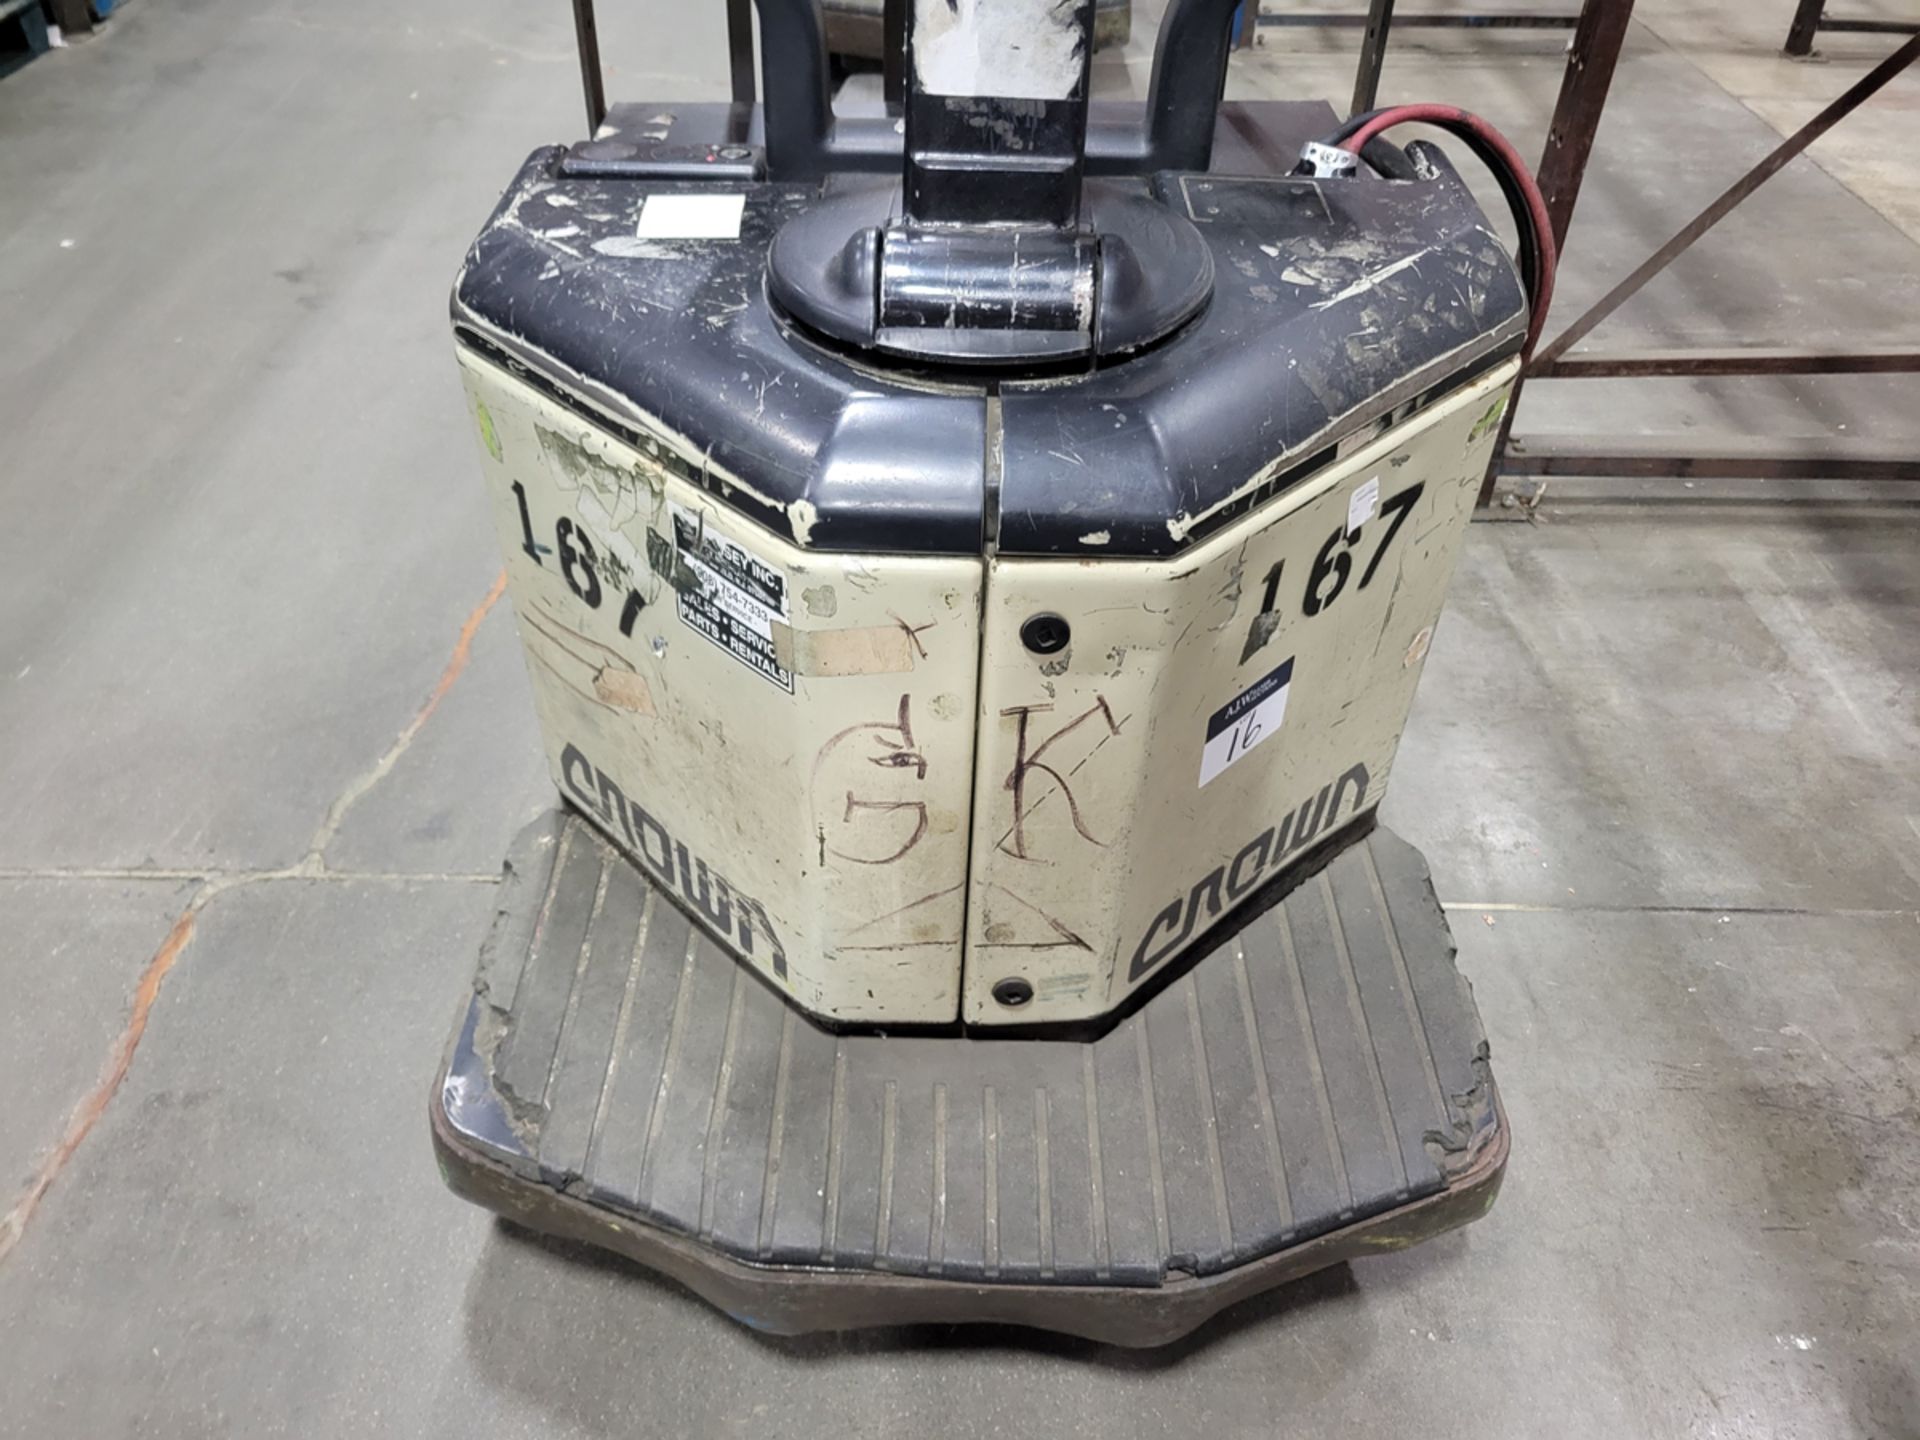 Crown PE3540-60 6,000lbs Electric 24V Rider Pallet Jack w/ Charger - Image 4 of 10